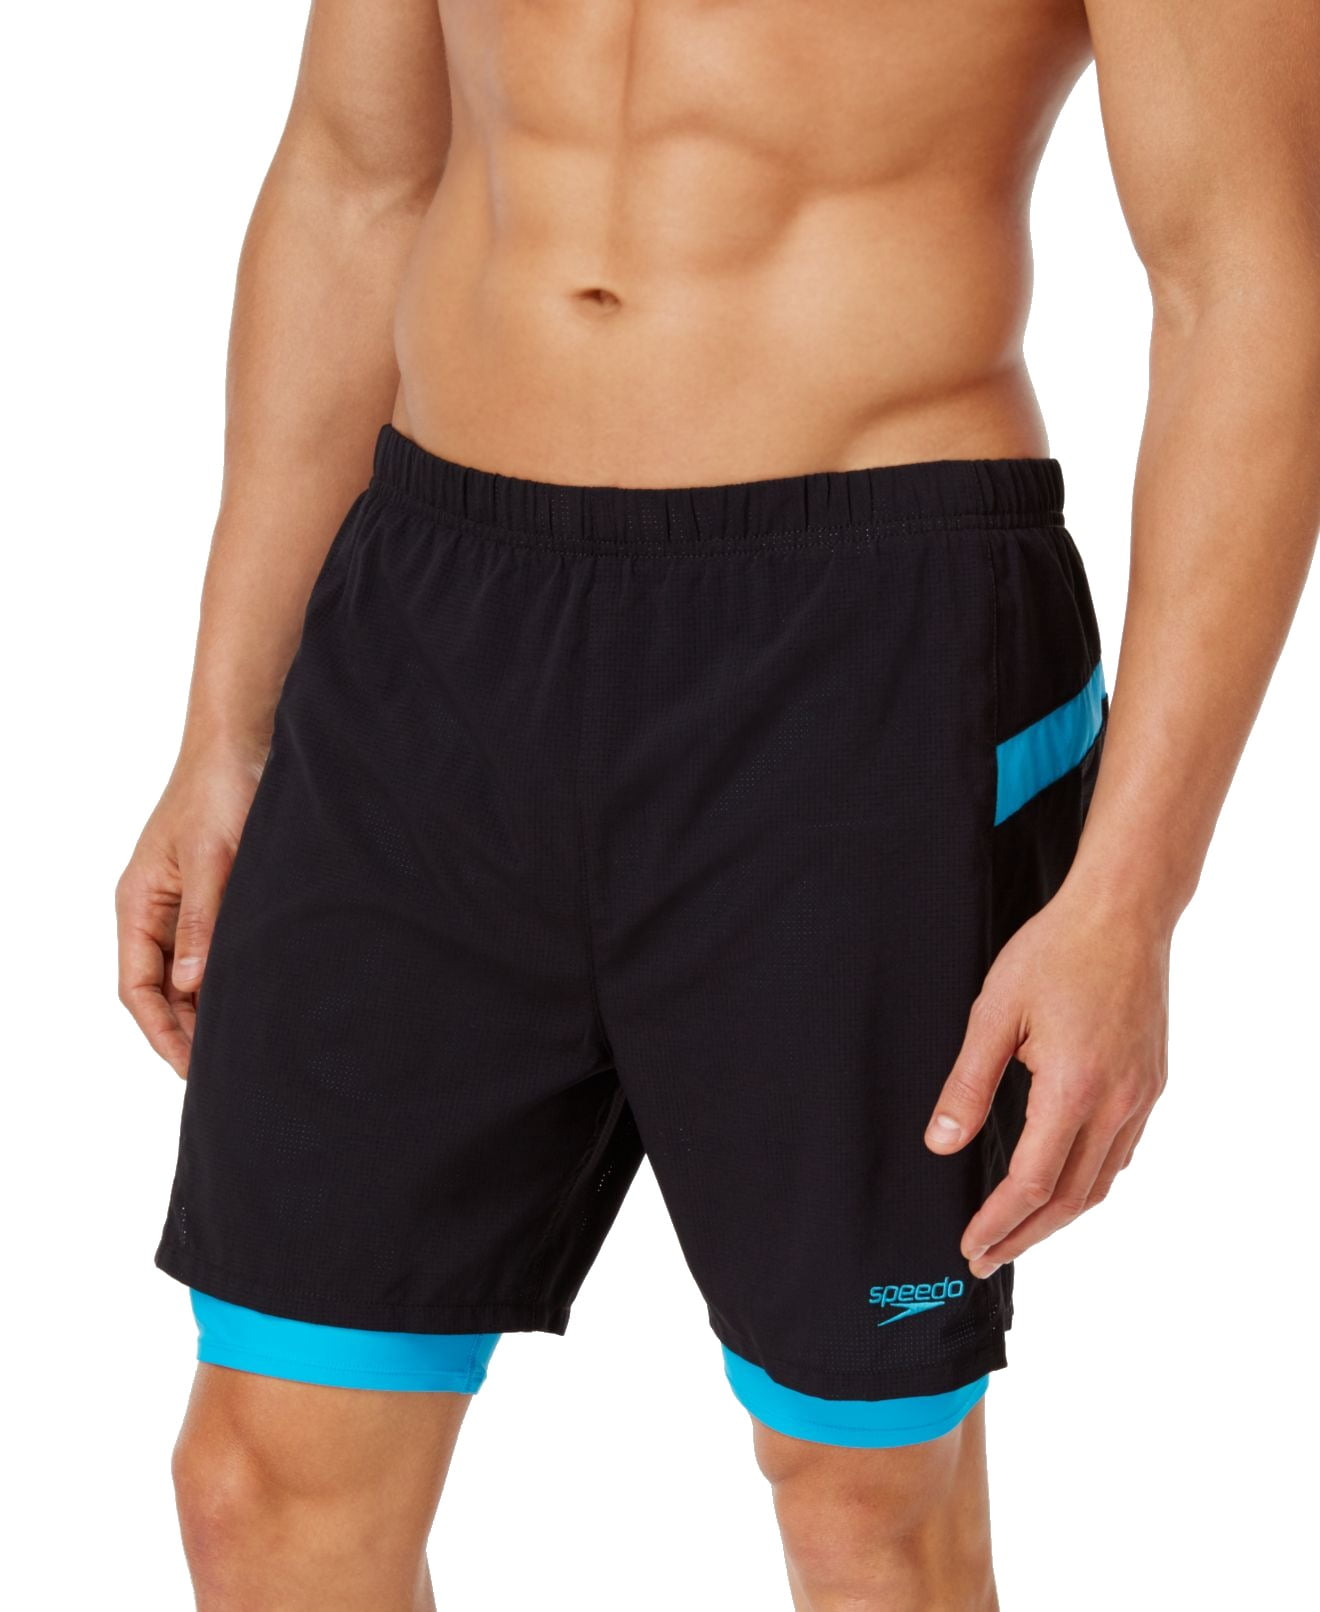 nike swim trunks with compression liner